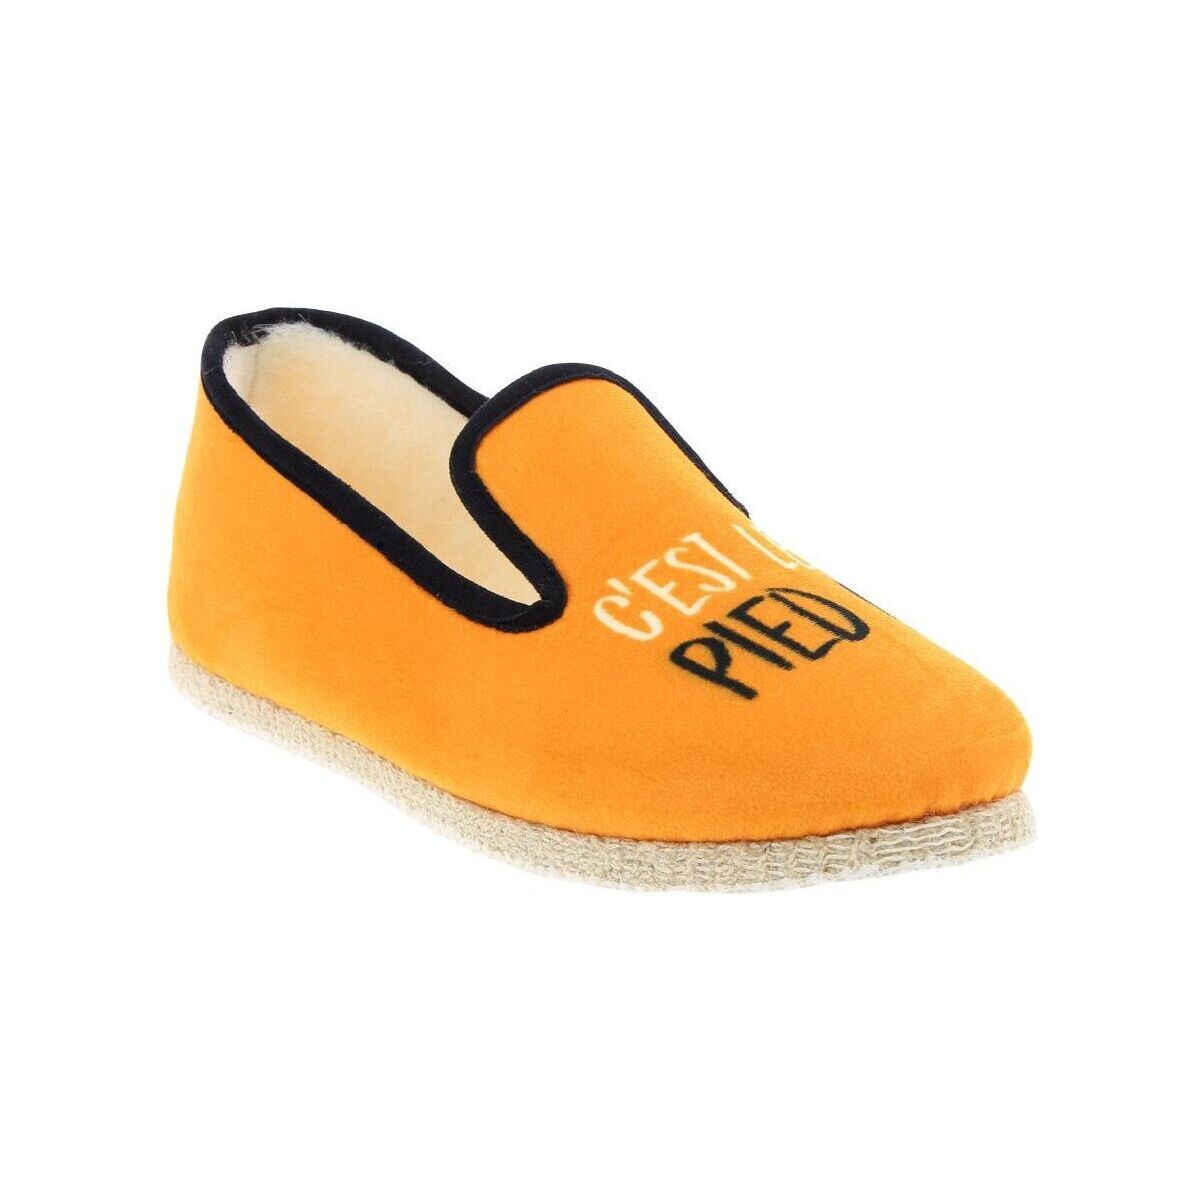 Chaussures Chaussons Chausse Mouton Charentaises MESSAGE Orange